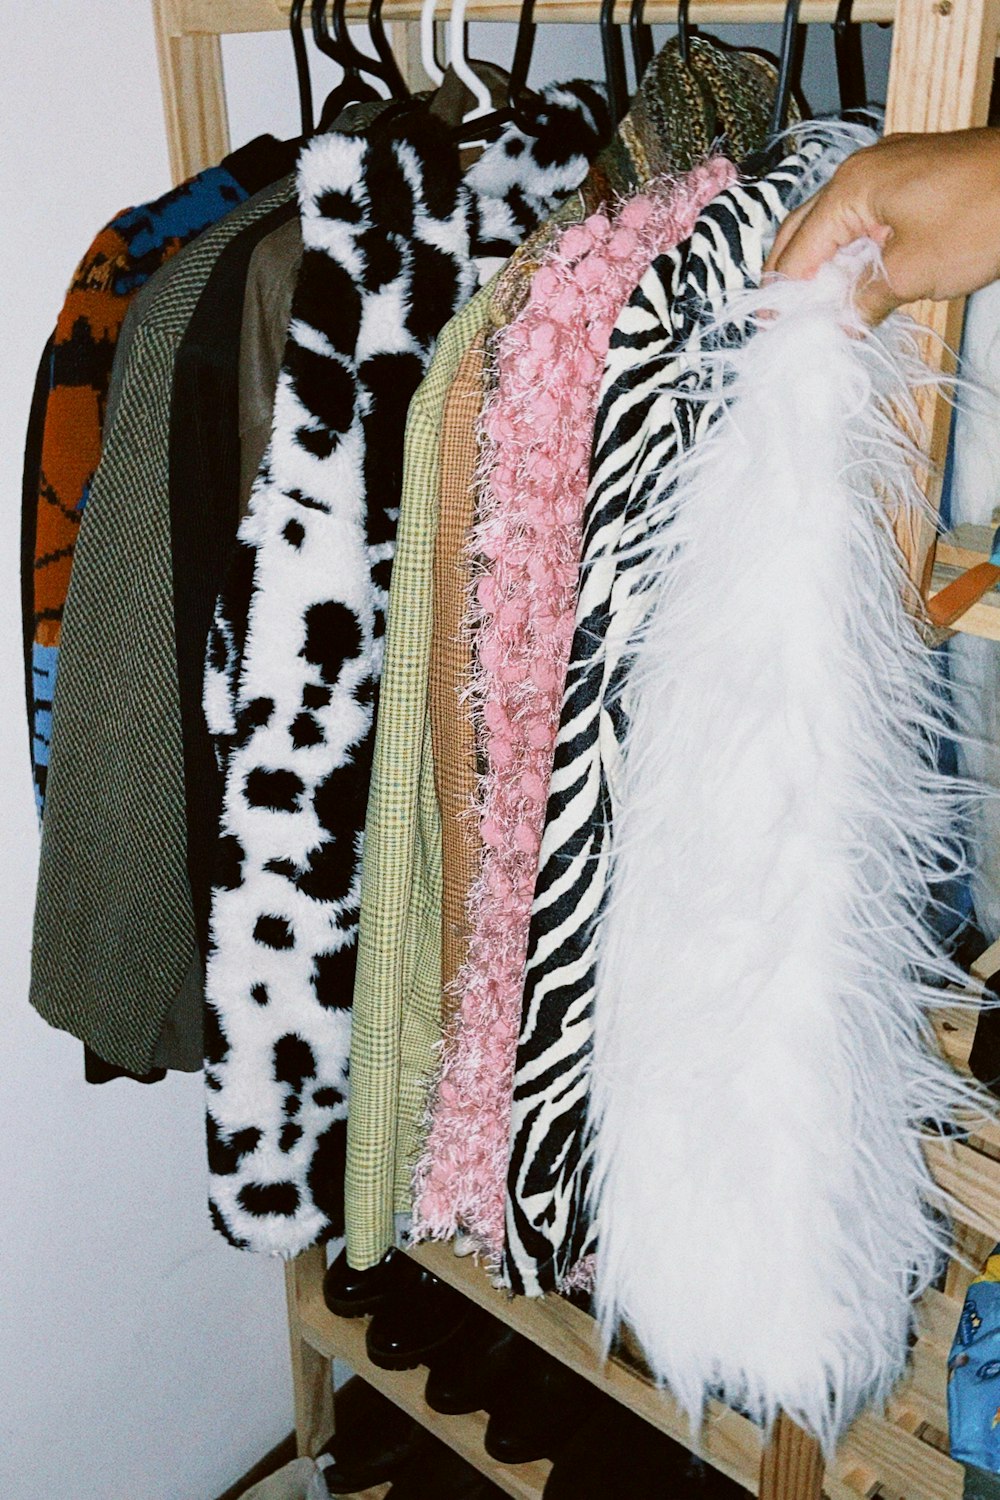 a person is holding a rack of clothes